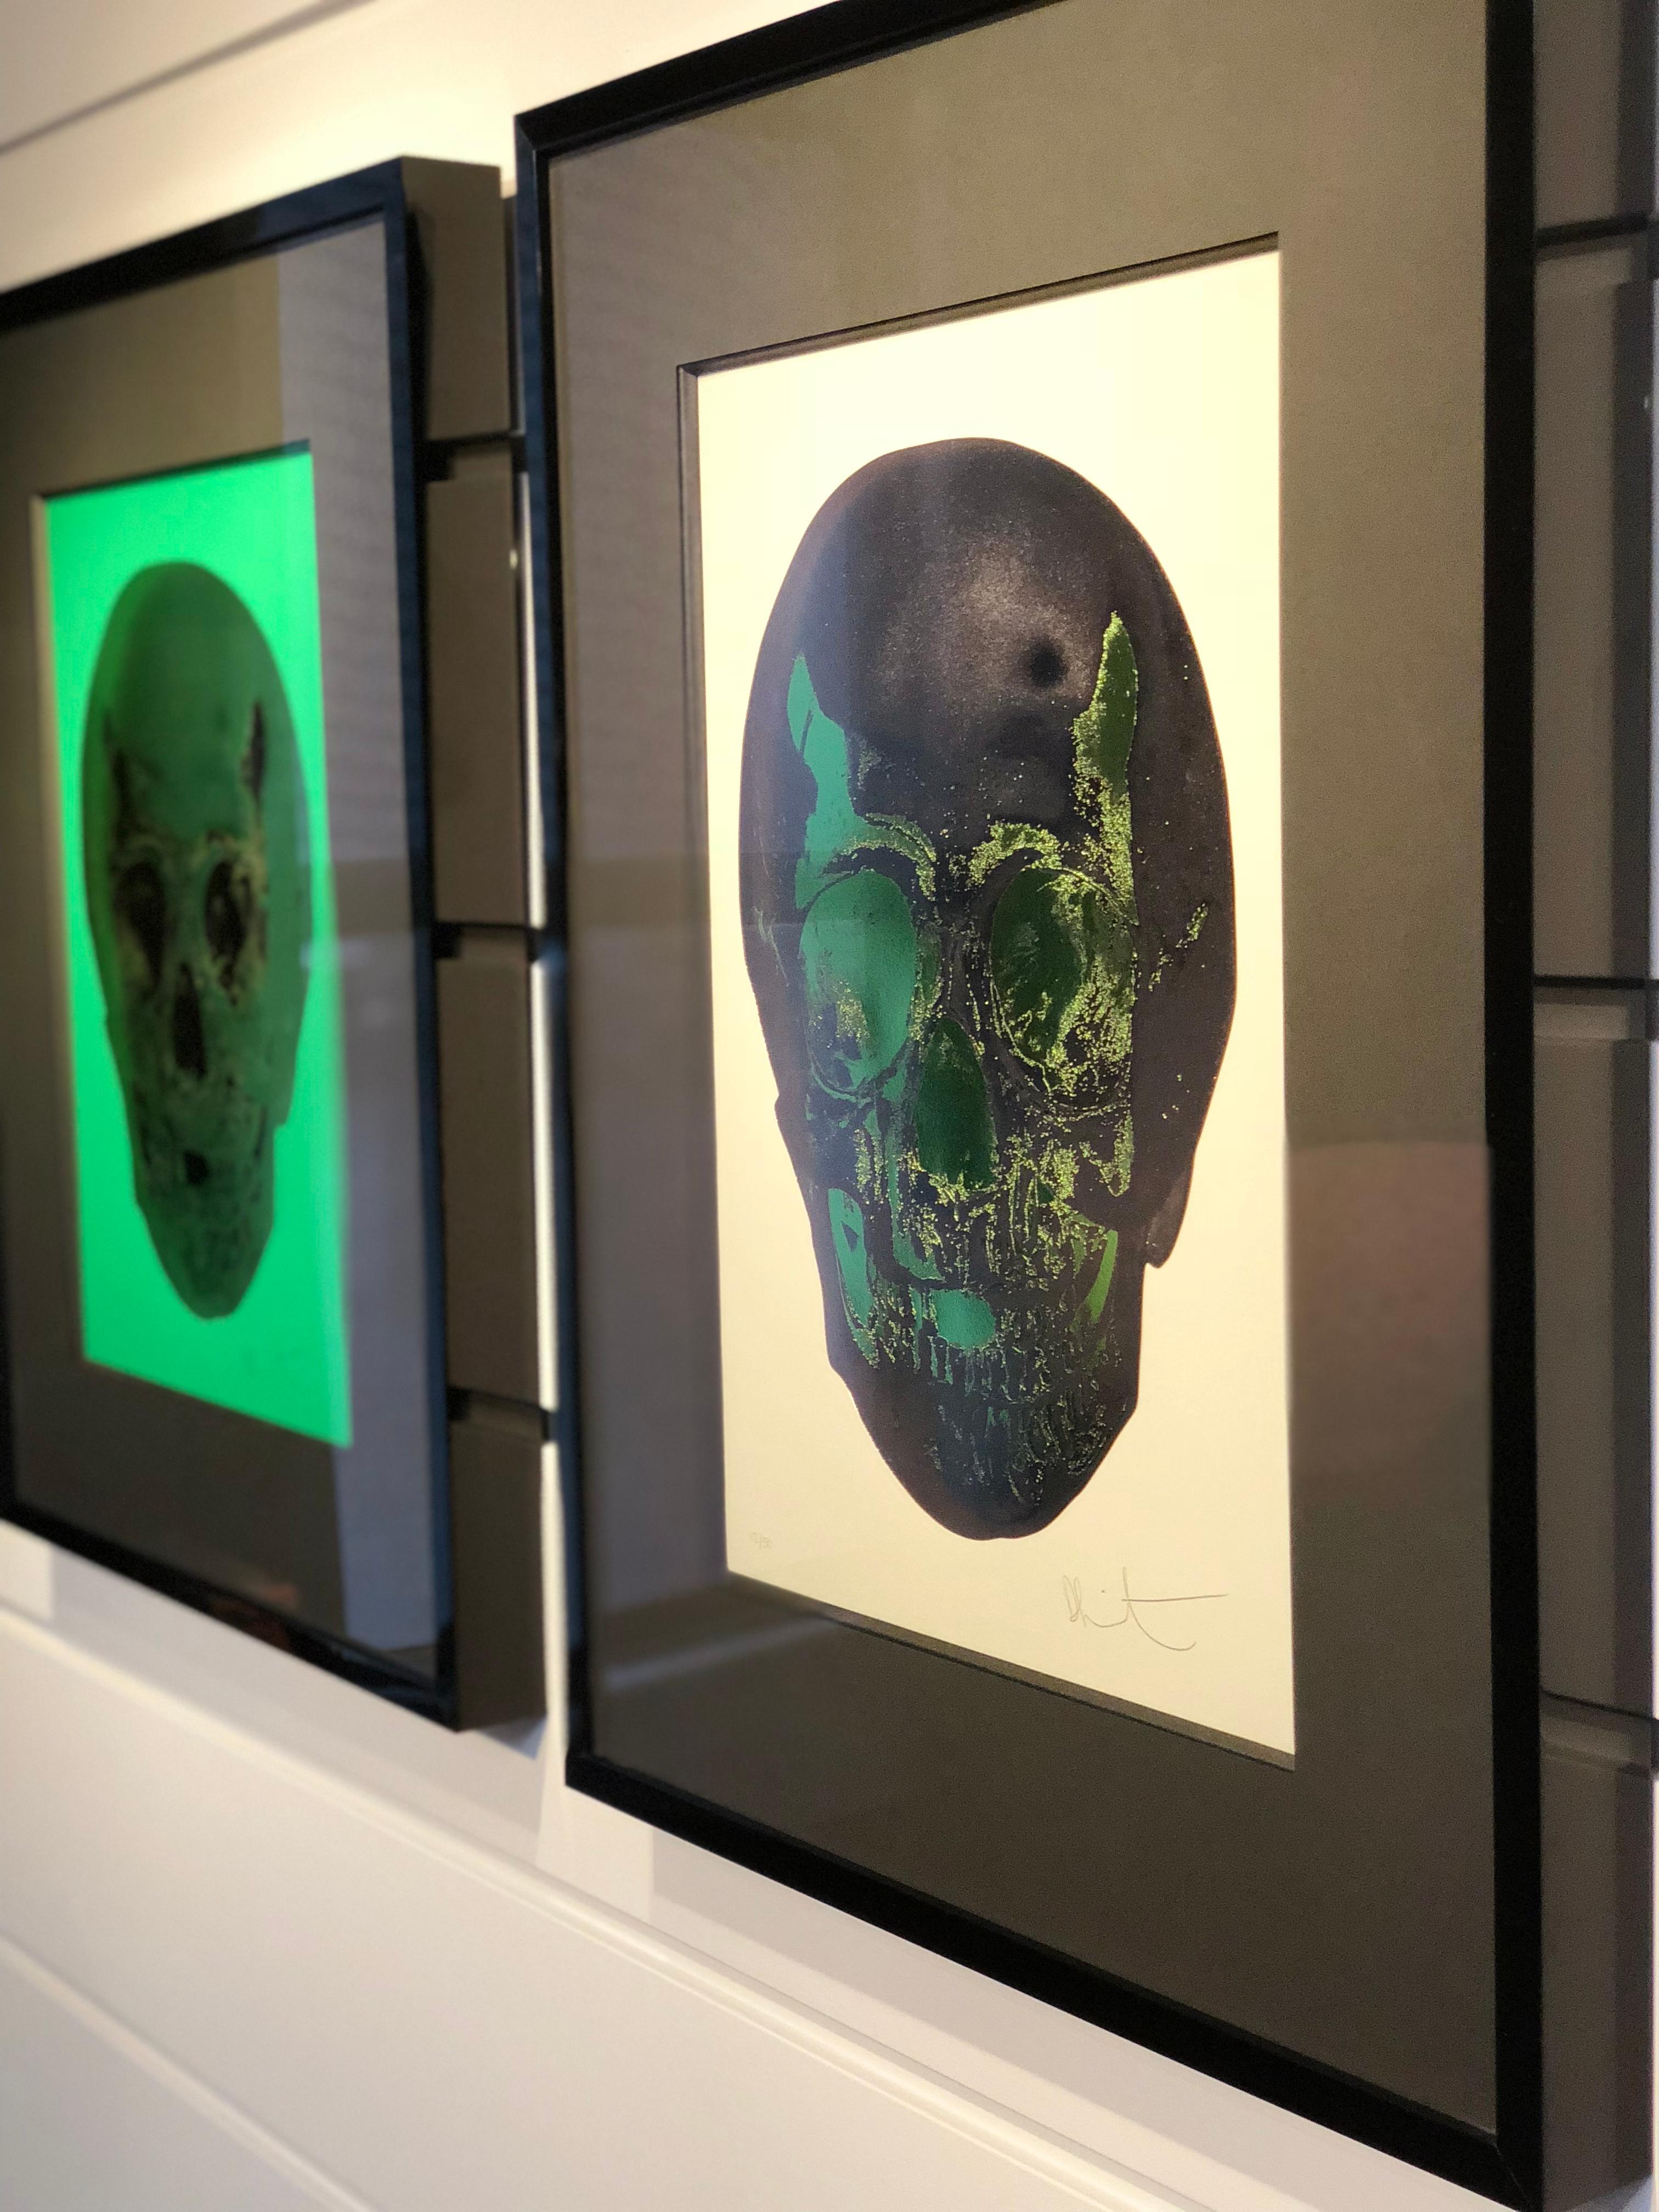 These are stunning works by iconic artist Damien Hirst. The series is created in a small edition of only 50 pieces, signed by the artist. The printing technique of using silkscreen, foil block and glaze creates a unique texture and visual appeal.